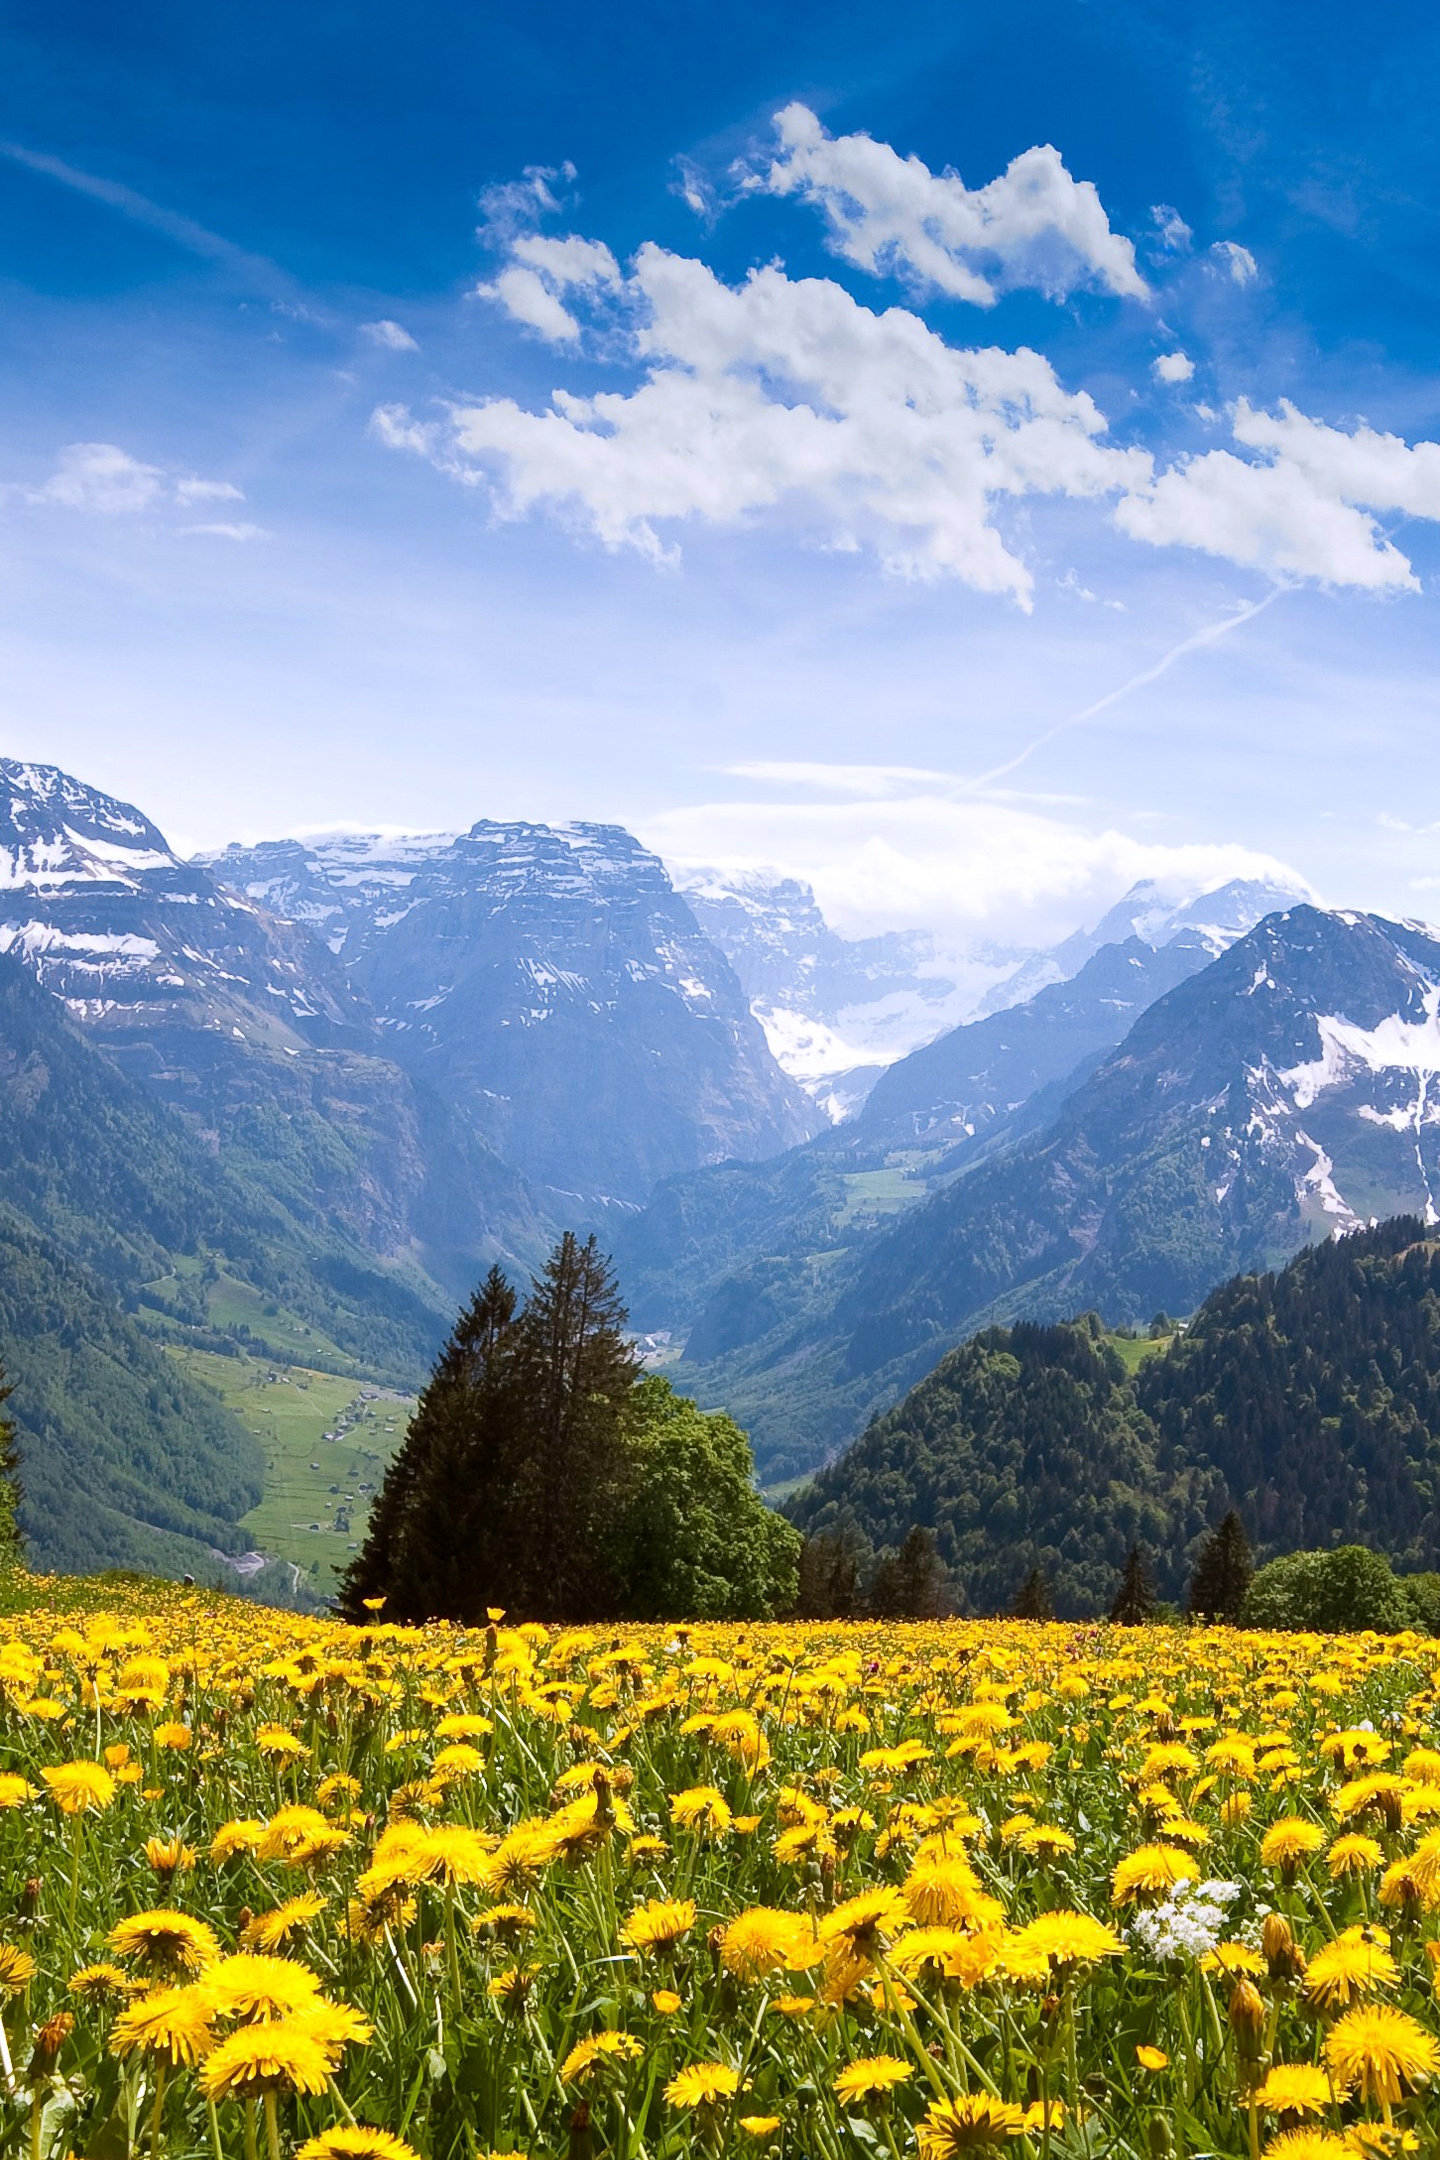 Image: Field, dandelions, trees, mountains, sky, clouds